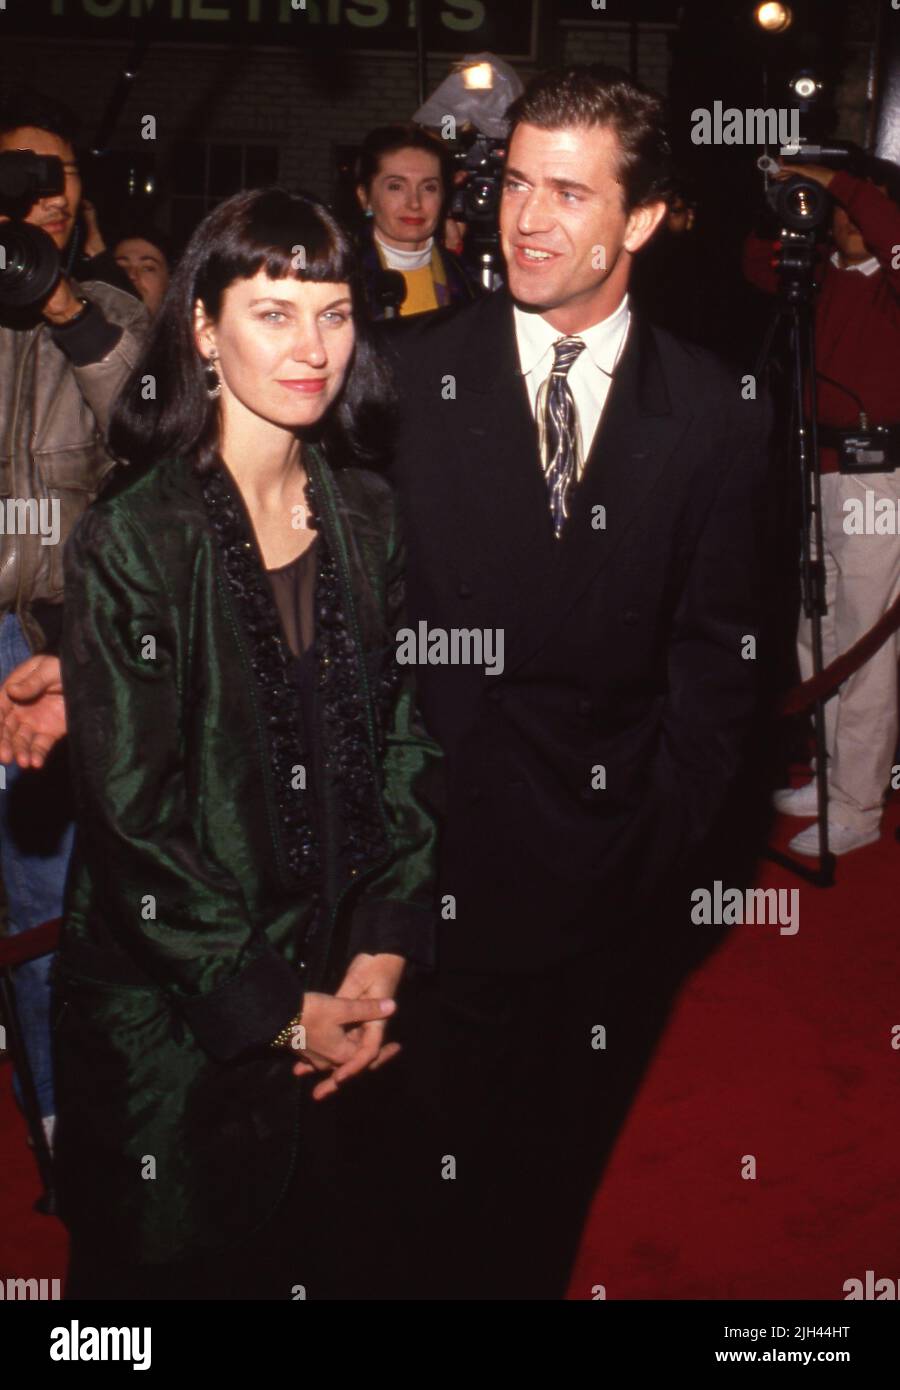 Mel Gibson and wife Robyn Gibson at the premiere of Hamlet on  December 18, 1990 Credit: Ralph Dominguez/MediaPunch Stock Photo